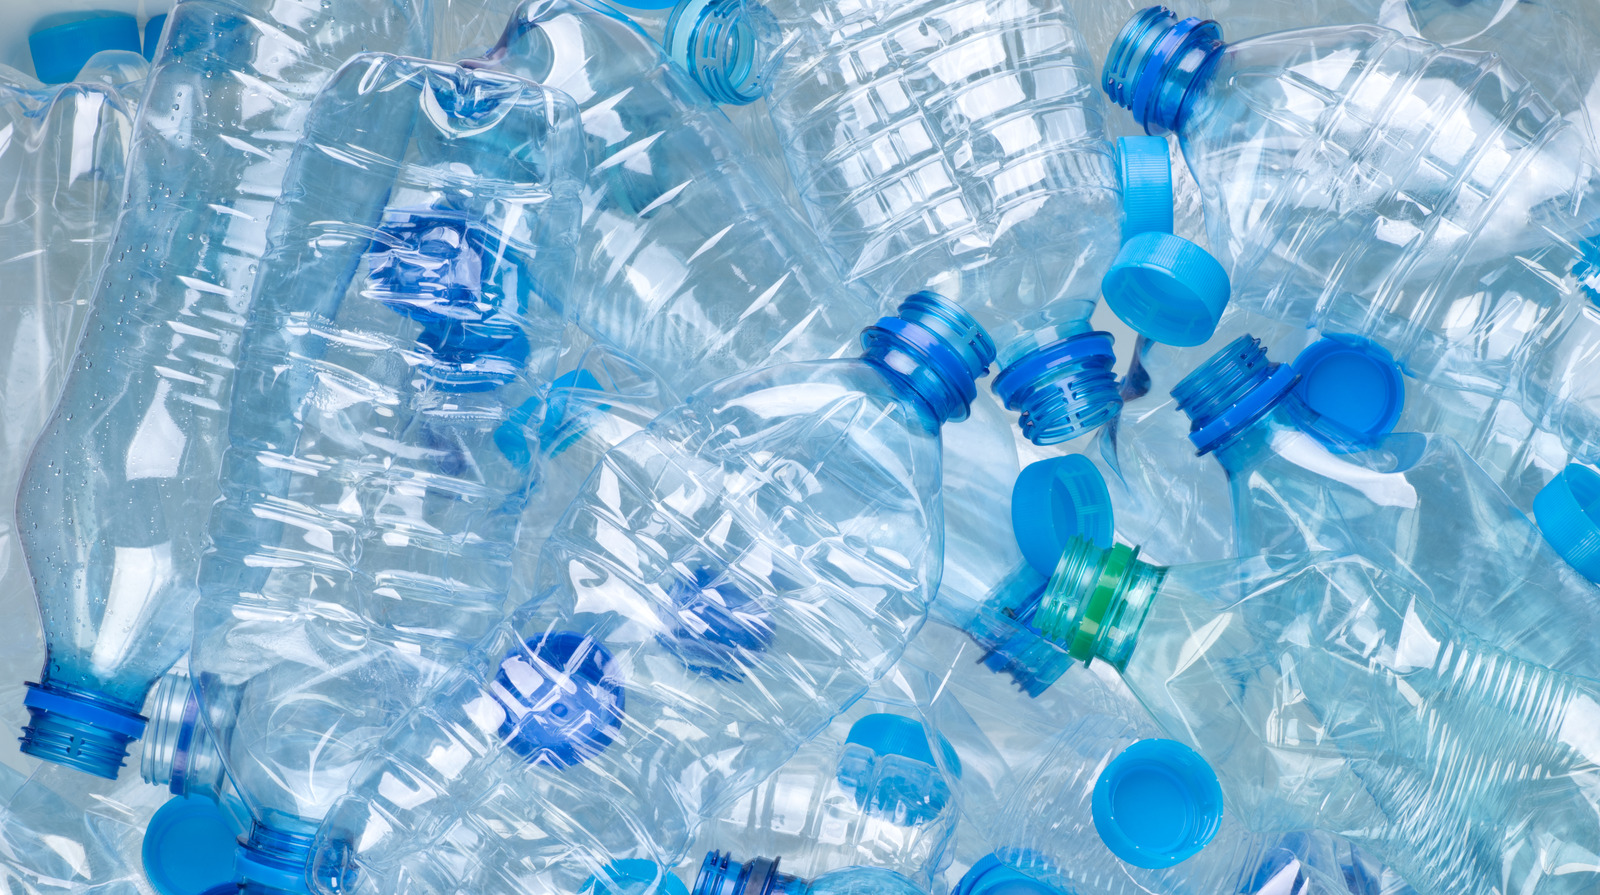 Is it safe to drink cases of water bottles that have been stored